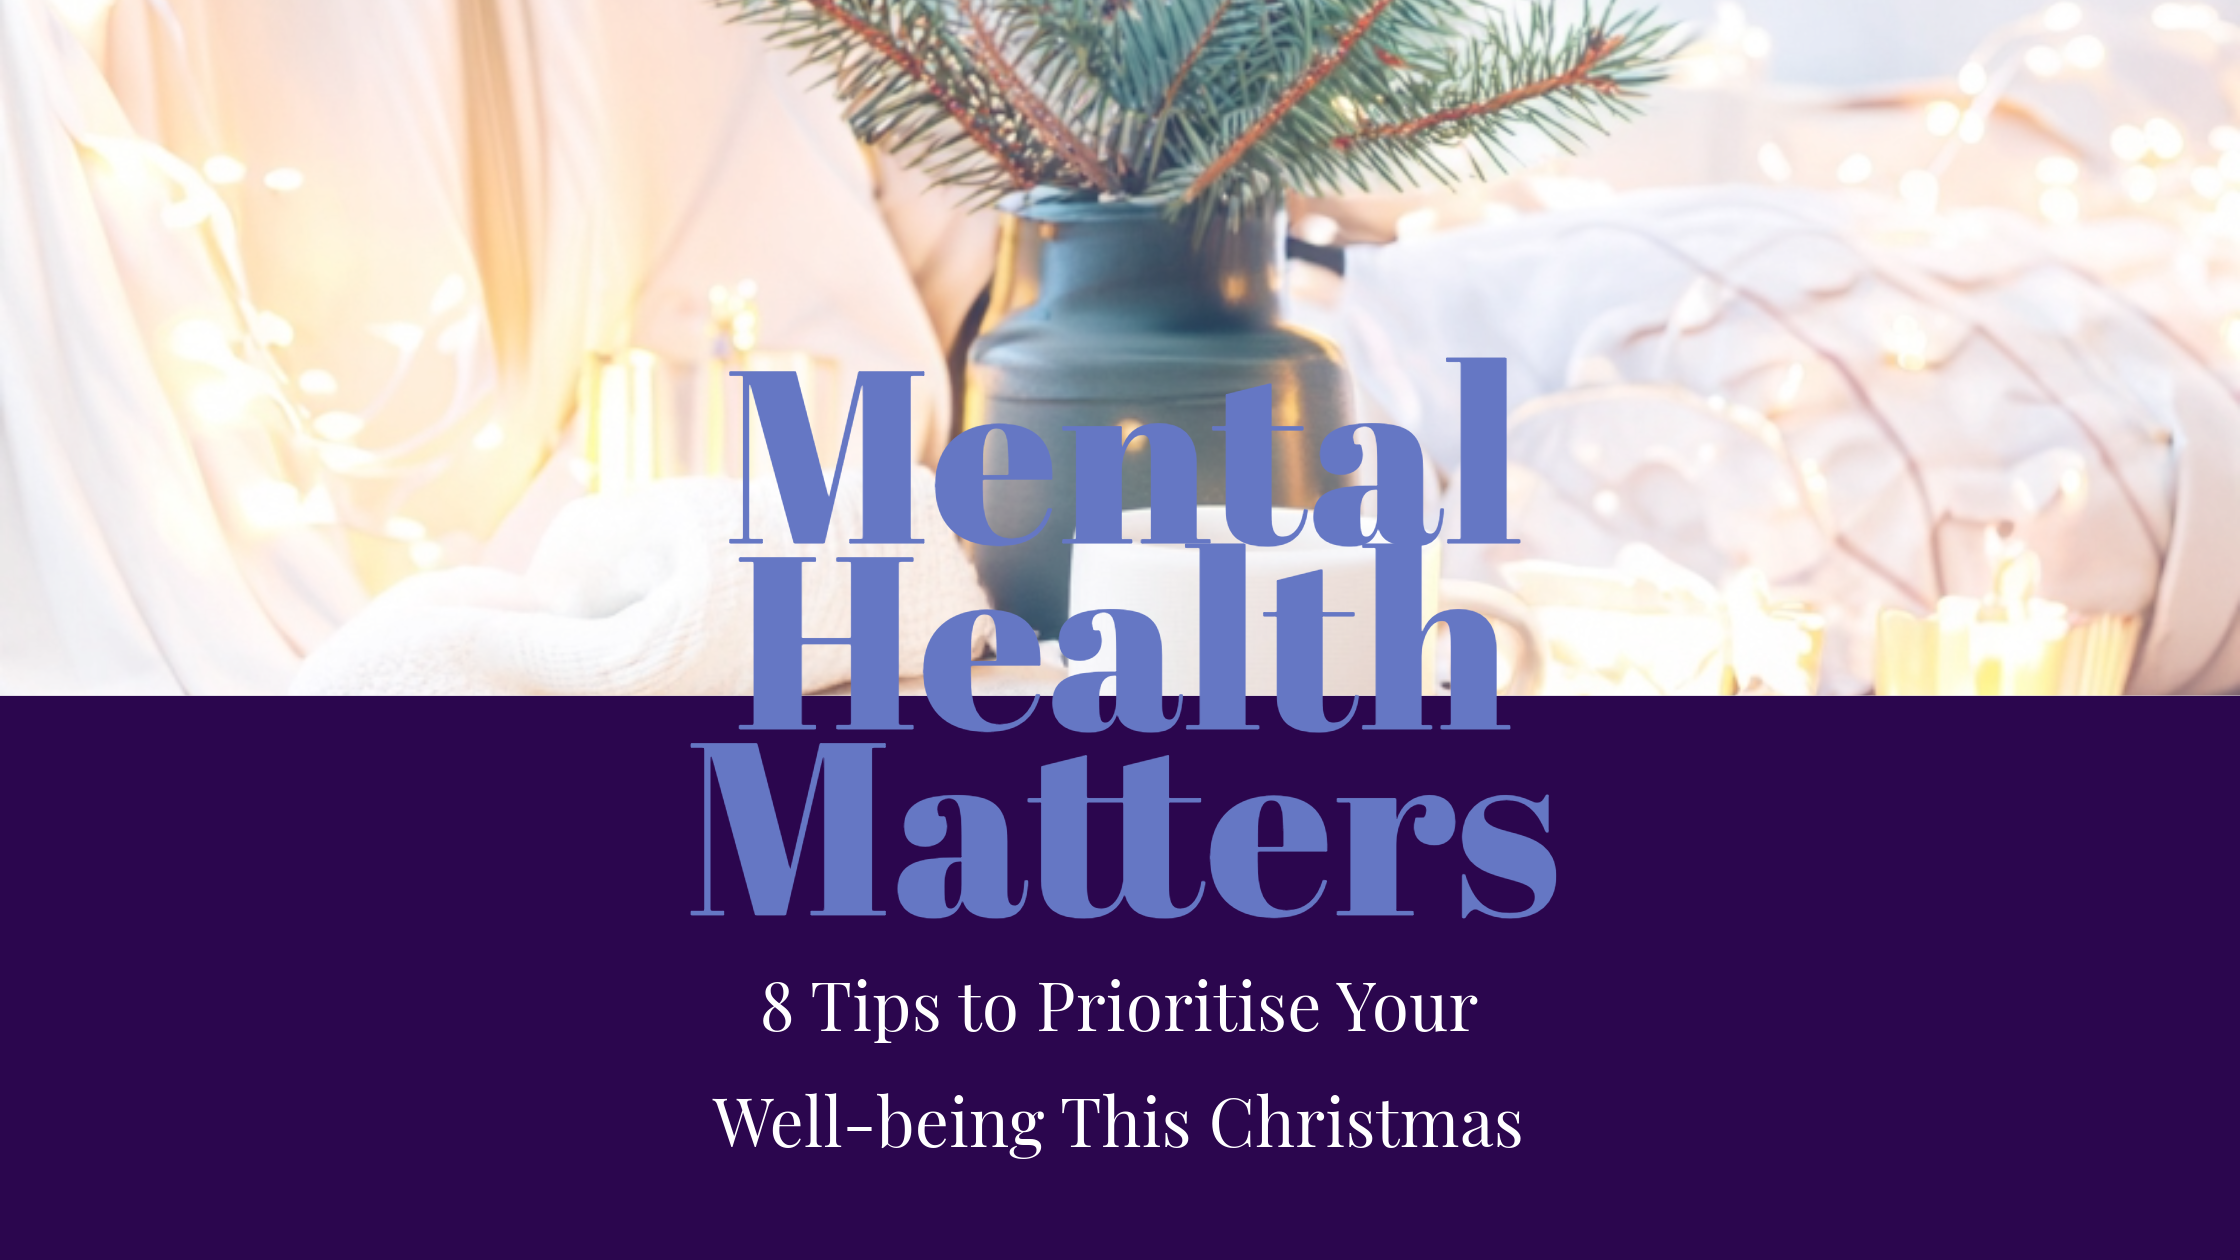 Blog post header for 8 Tips to Prioritise Your Mental Health This Christmas